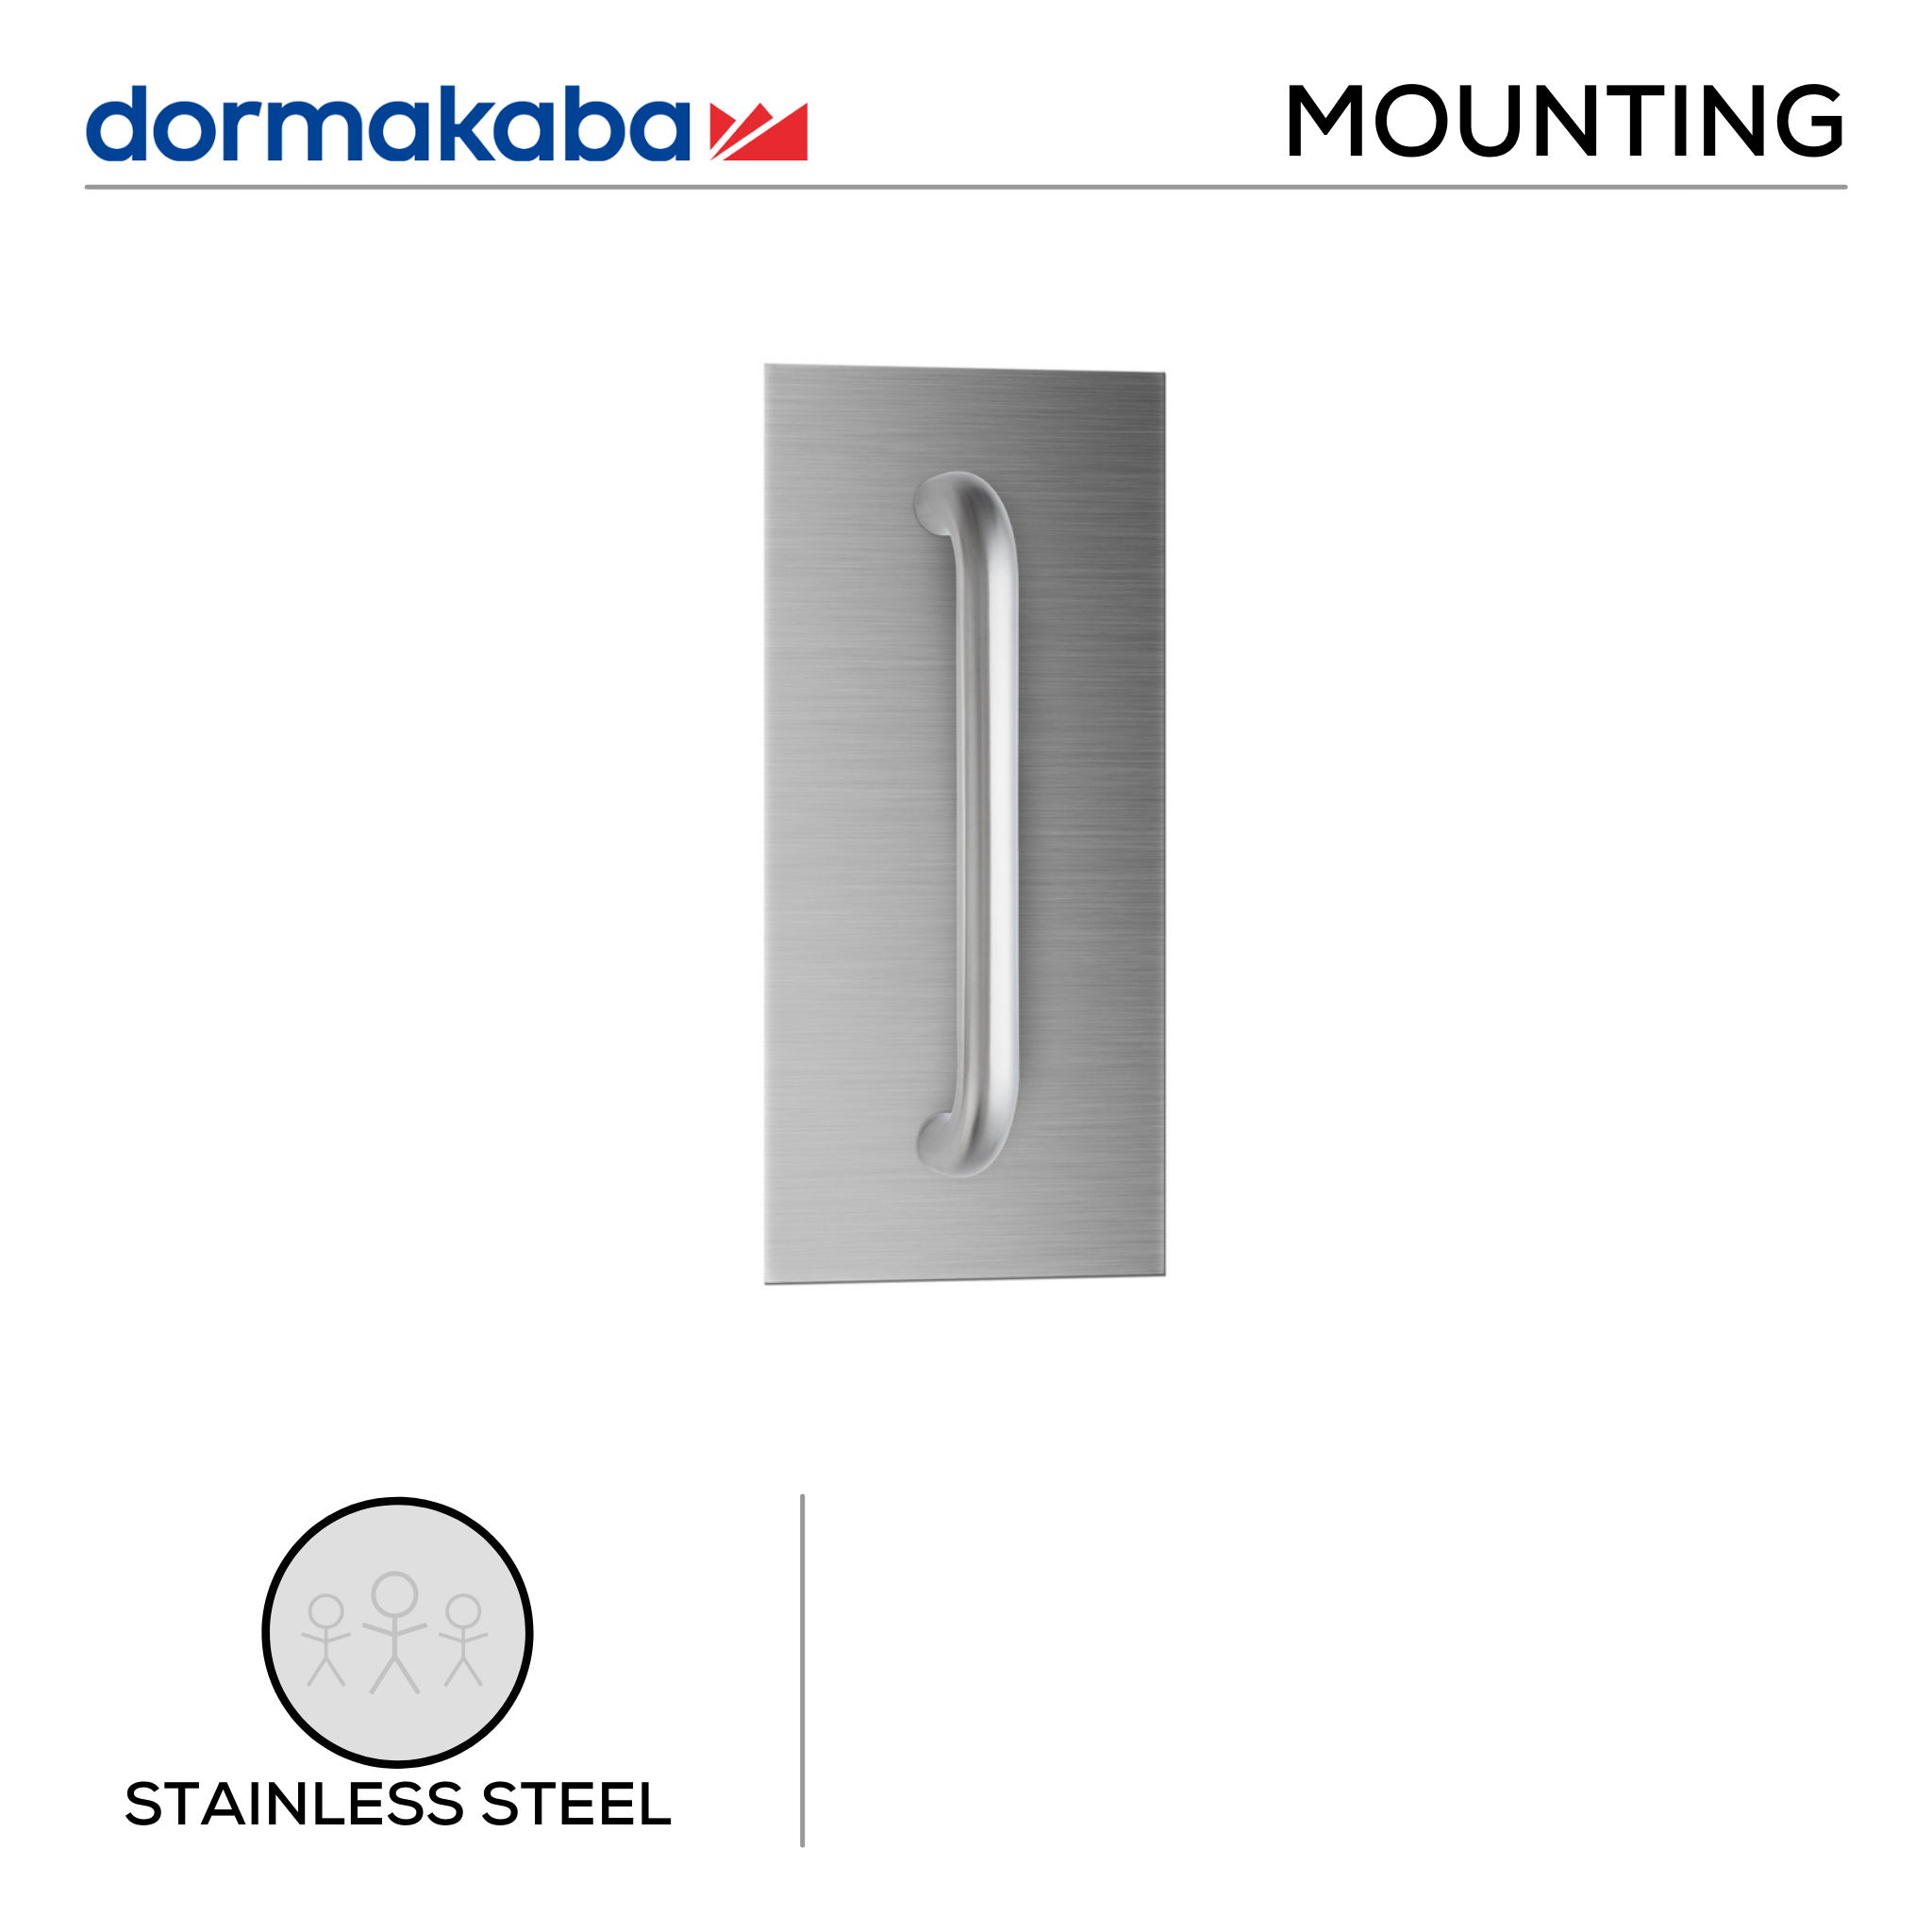 Handle Mounting (DKP-SS-167), Pull Handle Mounting, Brushed Stainless Steel, DORMAKABA